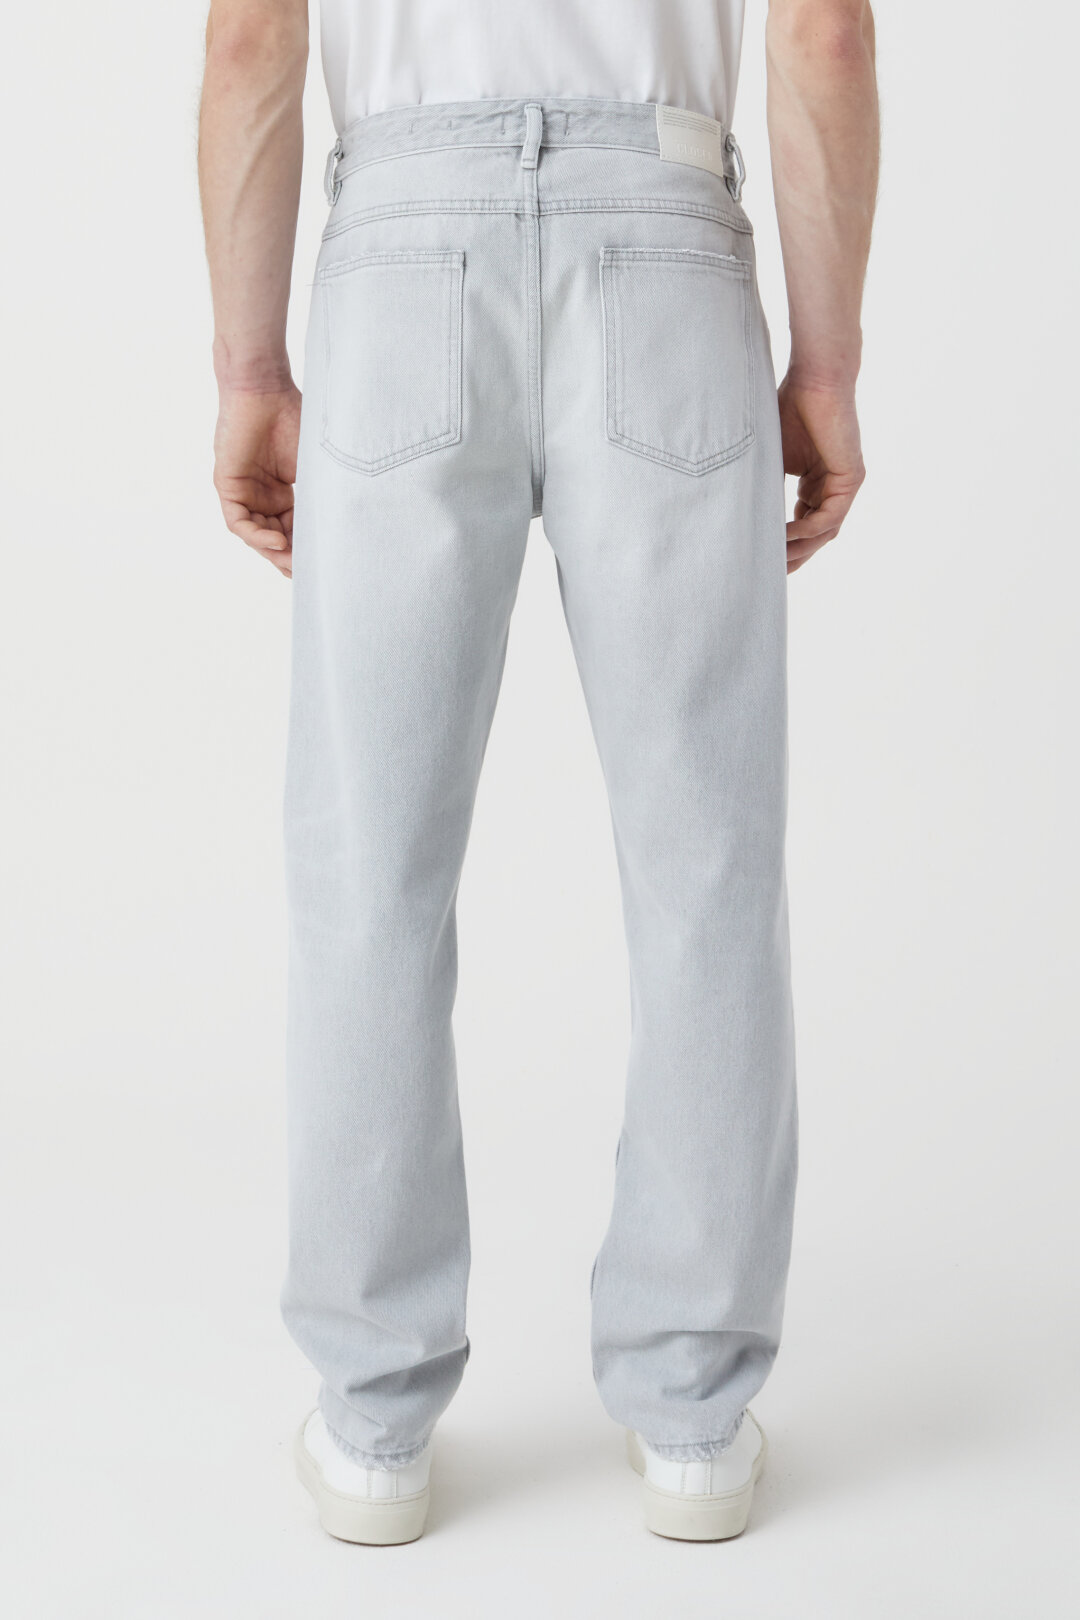 CLOSED X-Lent Tapered Jeans in Light Grey